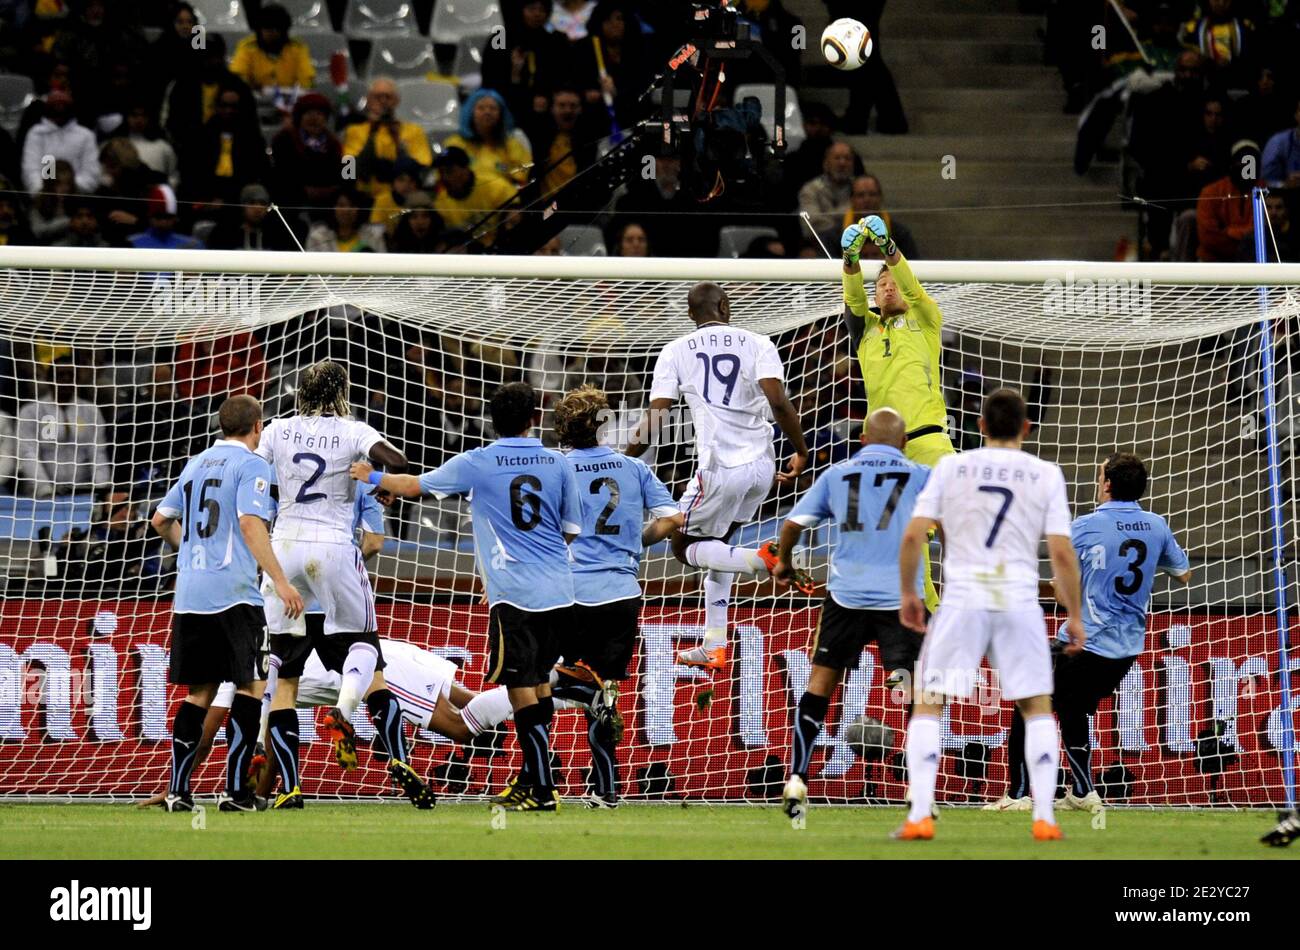 Uruguay's goal keeper Fernando Muslera makes a save during the FIFA World Cup soccer match, France (France national football team) vs Uruguay in Capetown, South Africa, on June 11, 2010. The match ended in a 0-0 draw. Photo by Christophe Guibbaud/Cameleon/ABACAPRESS.COM Stock Photo